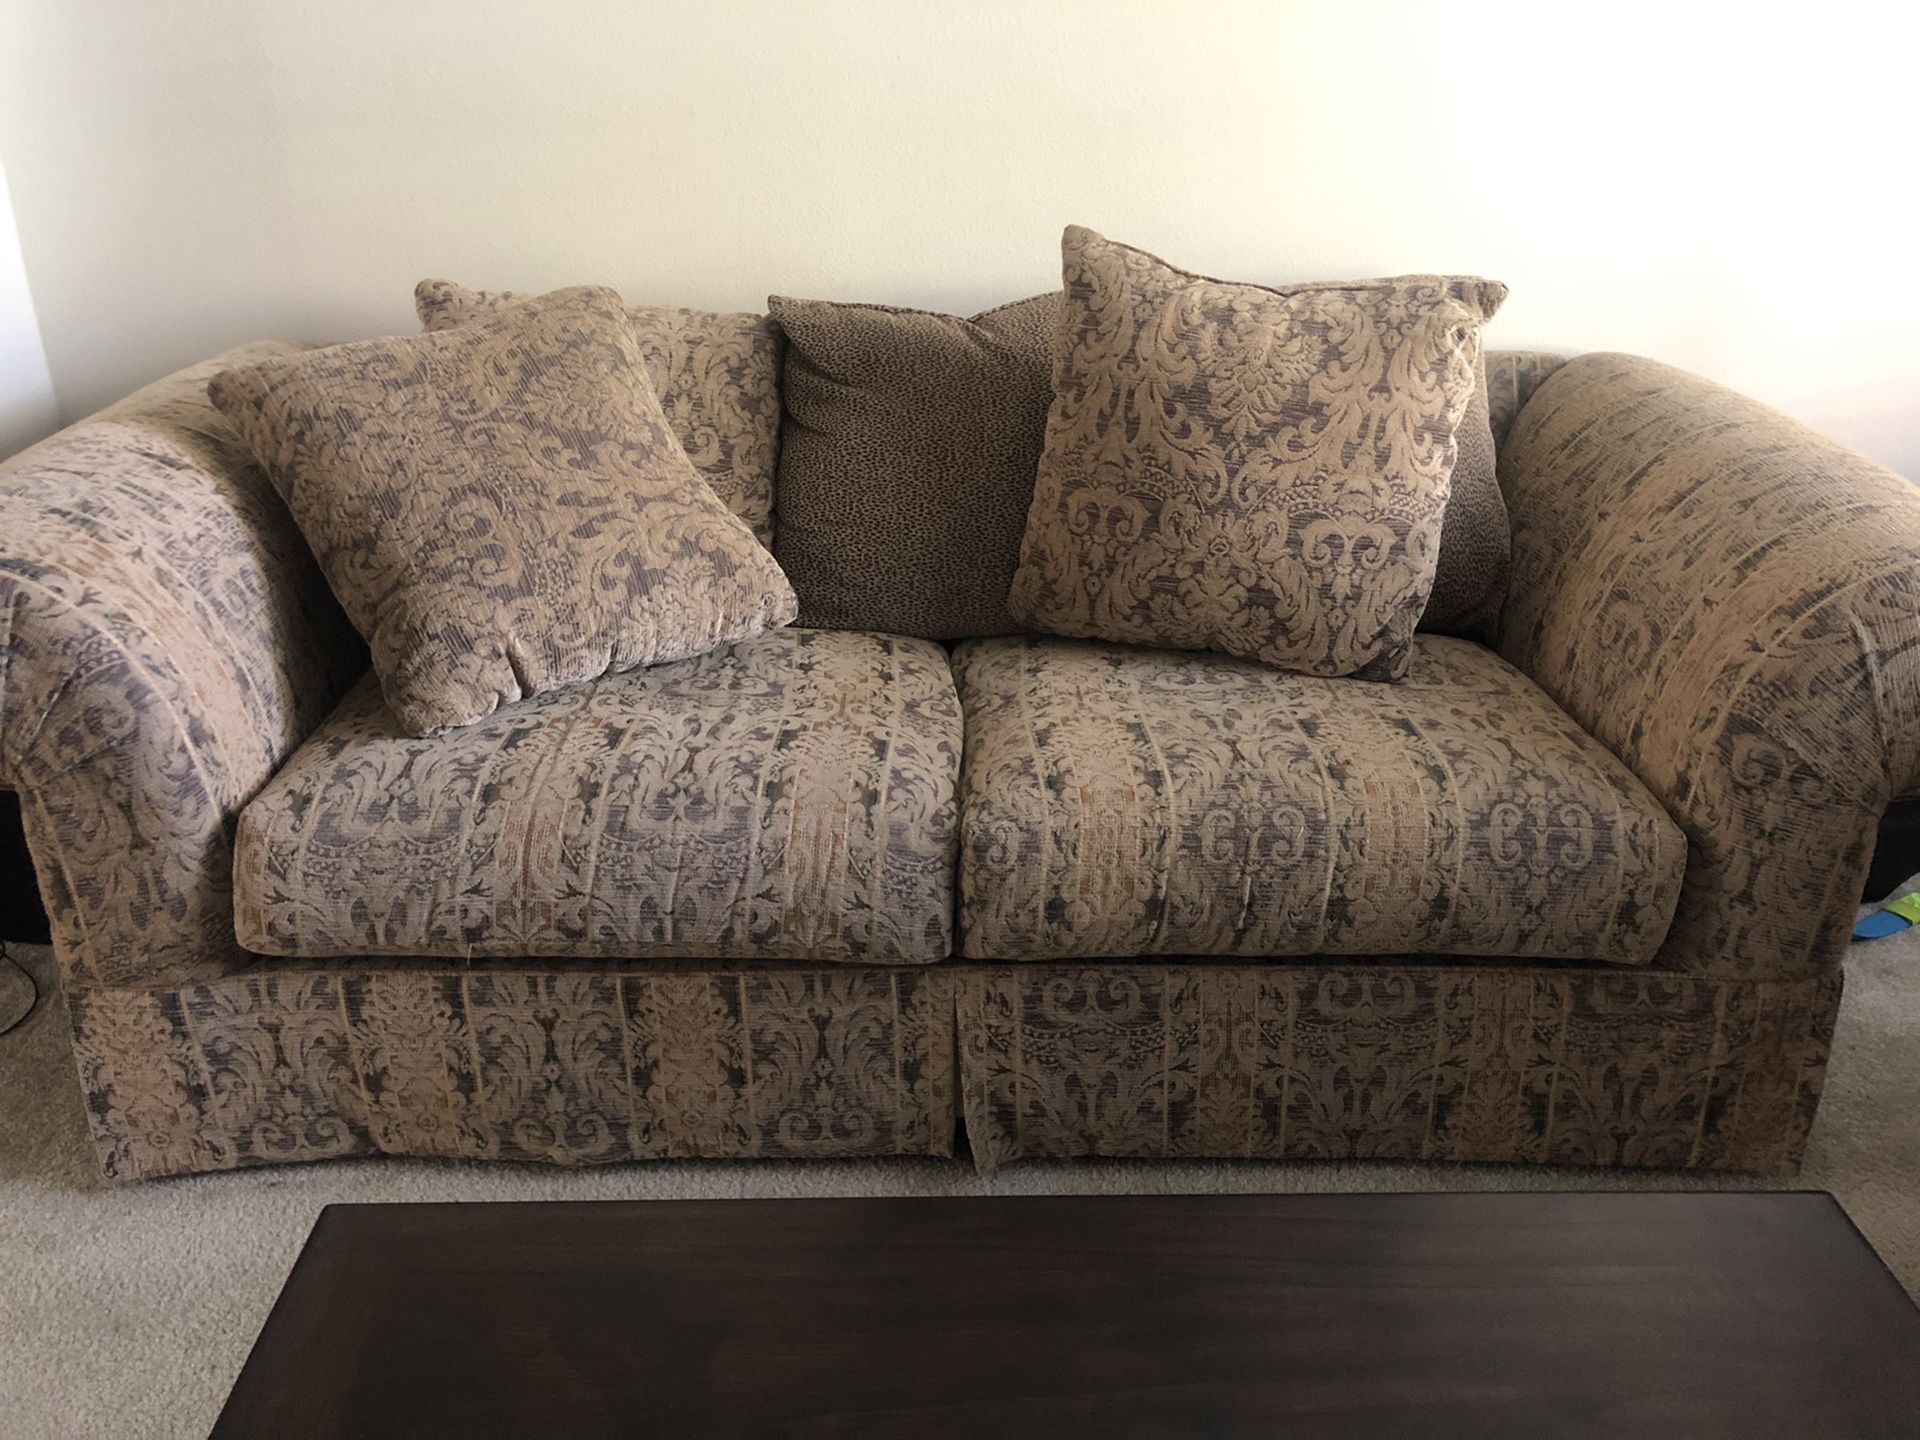 Sofa set, couch